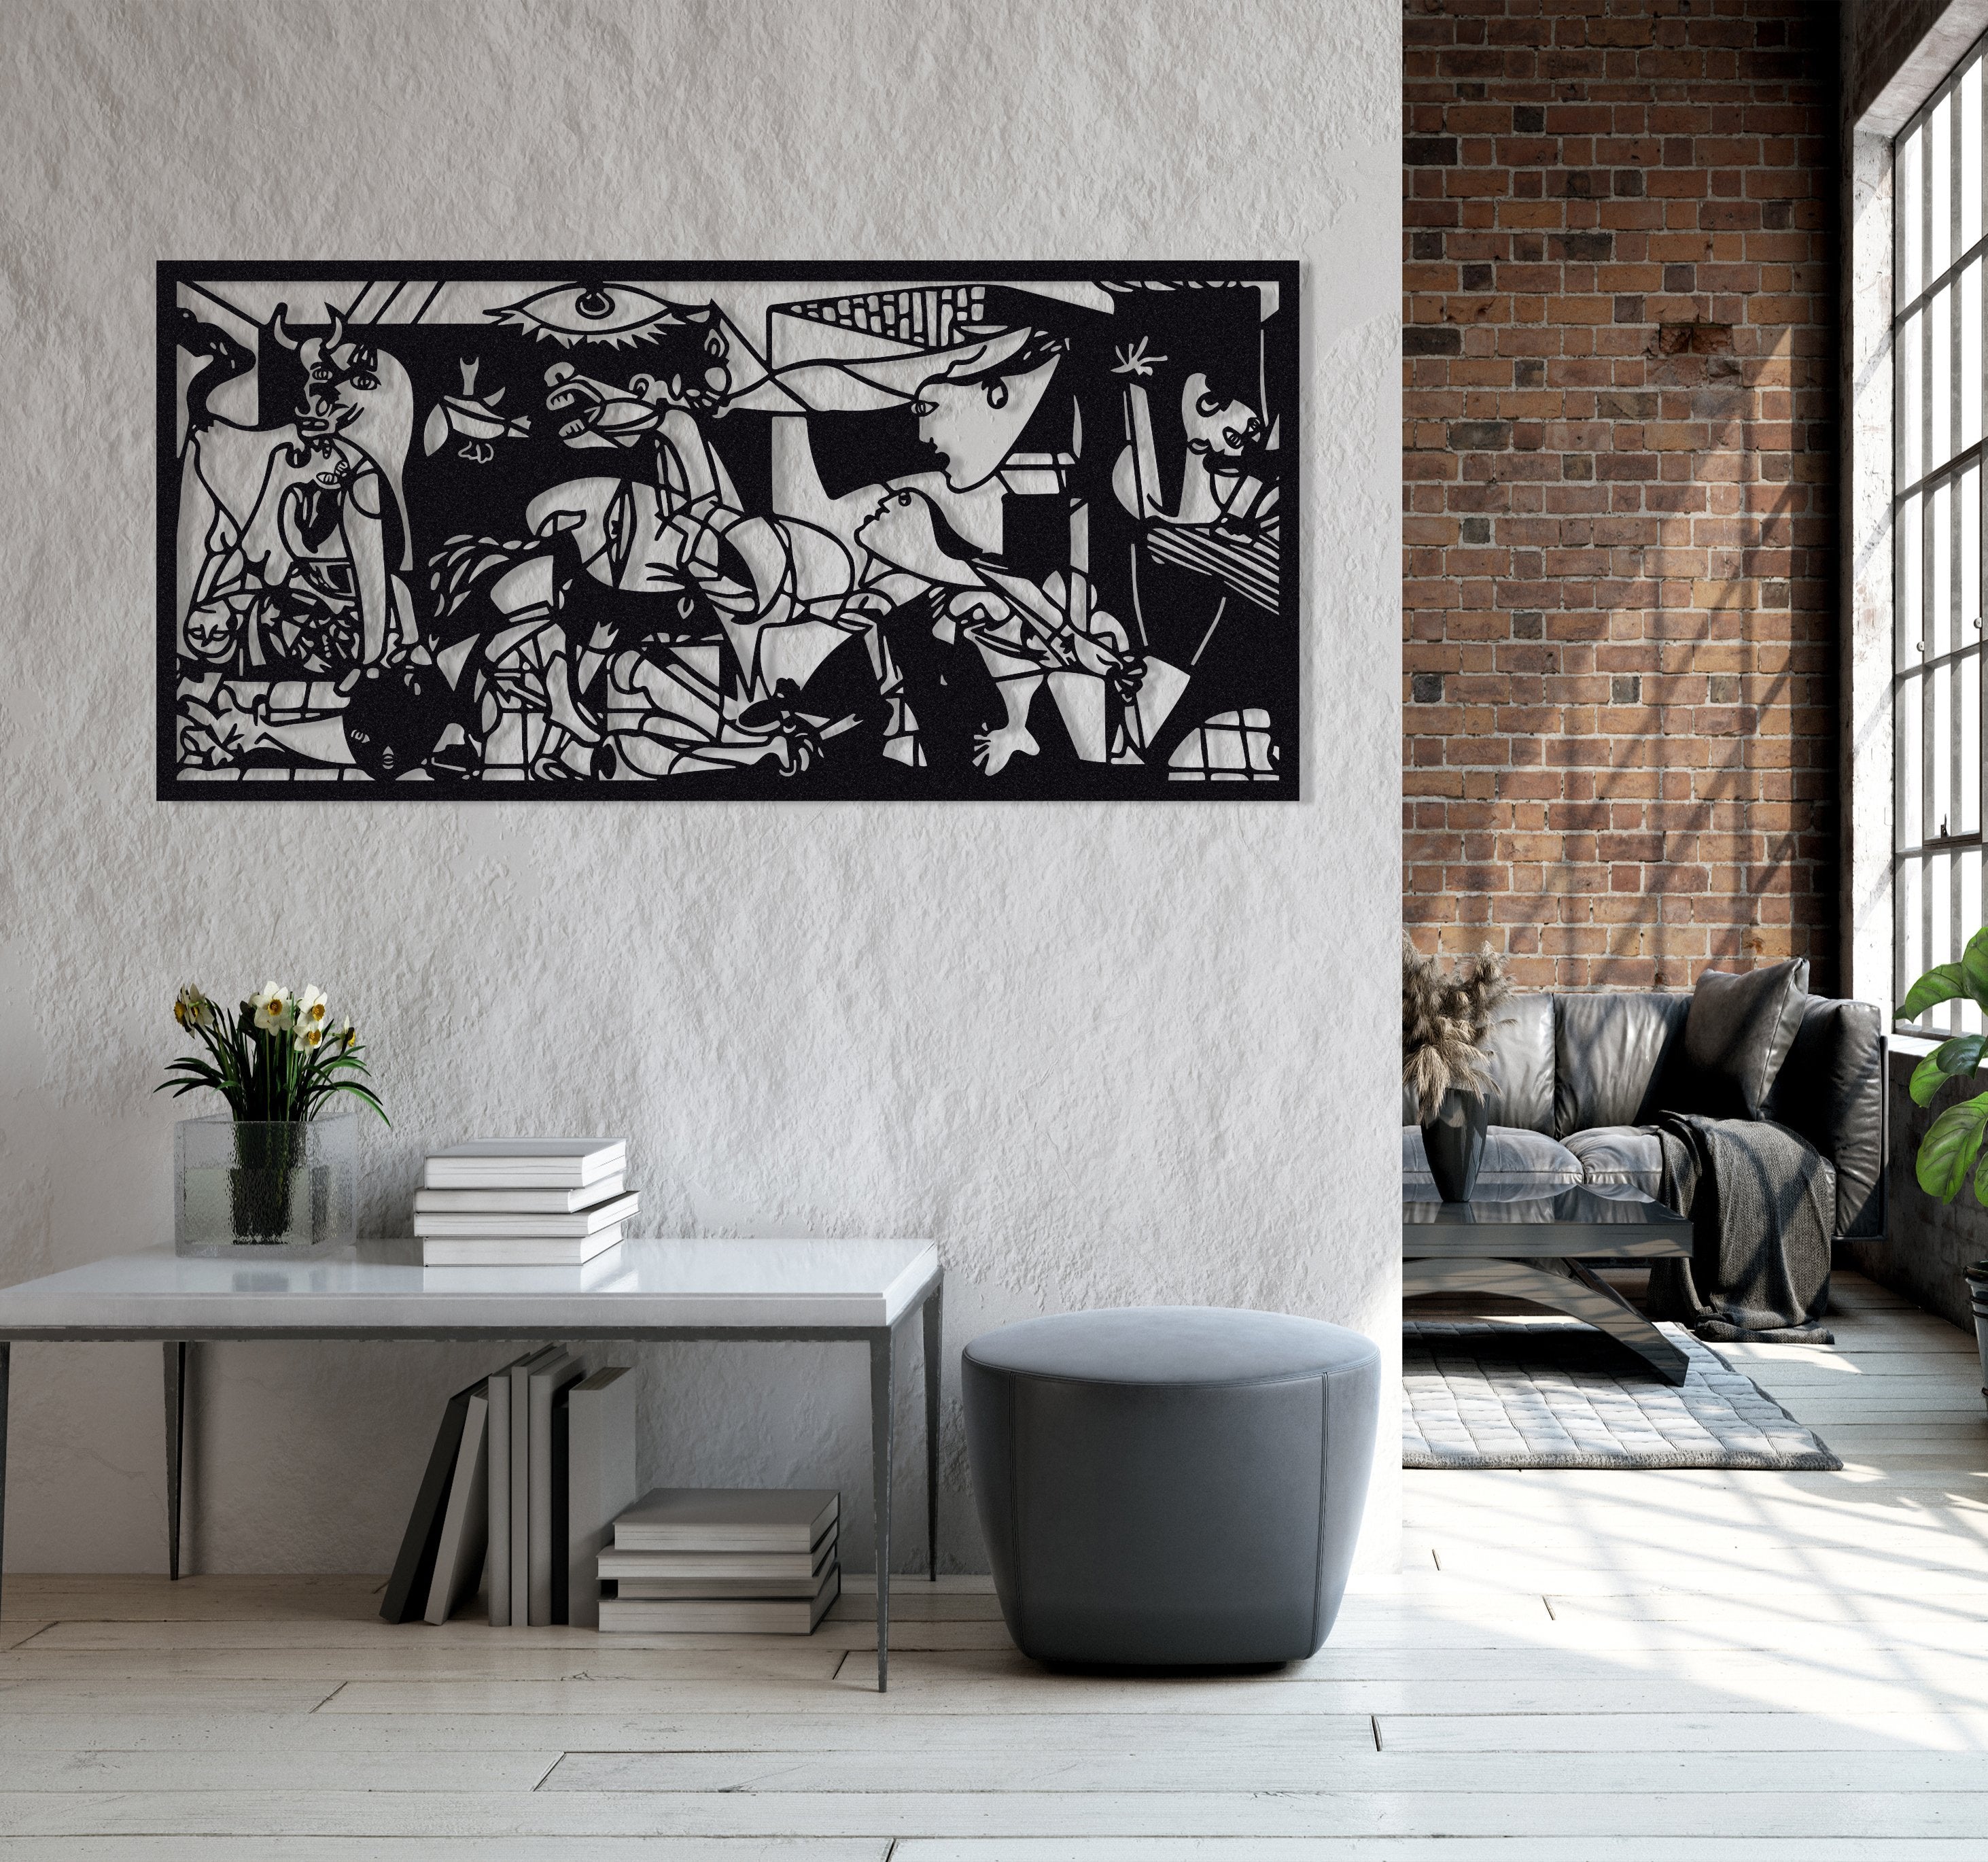 ・"Guernica Pablo Picasso"・Premium Metal Wall Art - Limited Edition